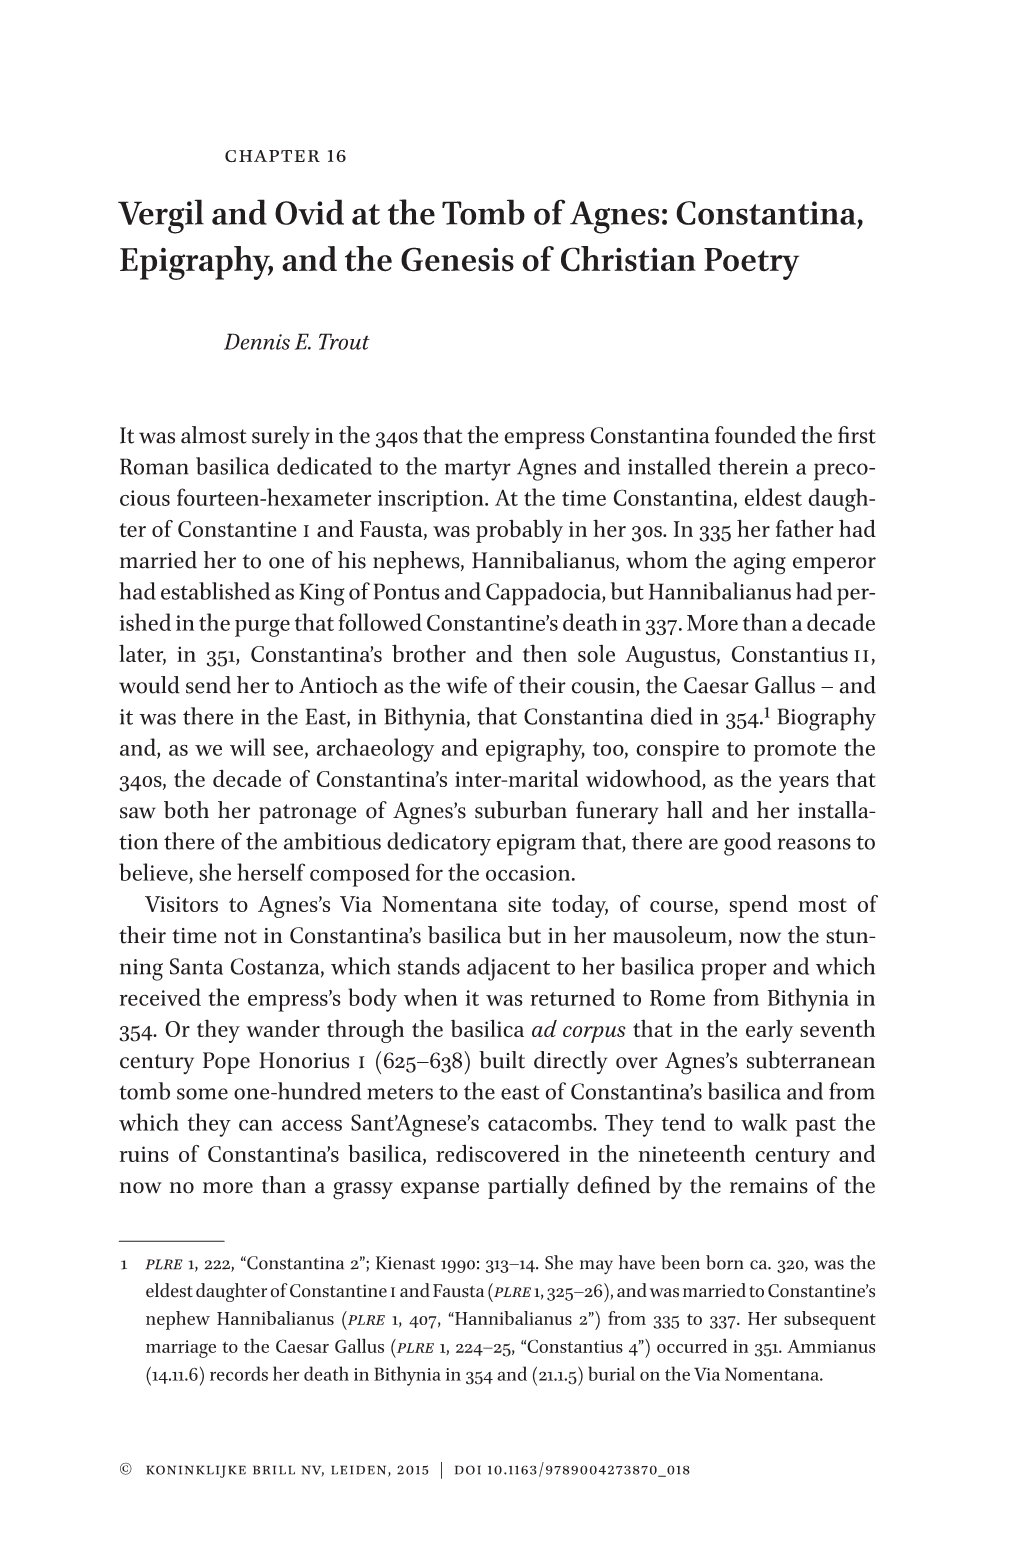 Constantina, Epigraphy, and the Genesis of Christian Poetry